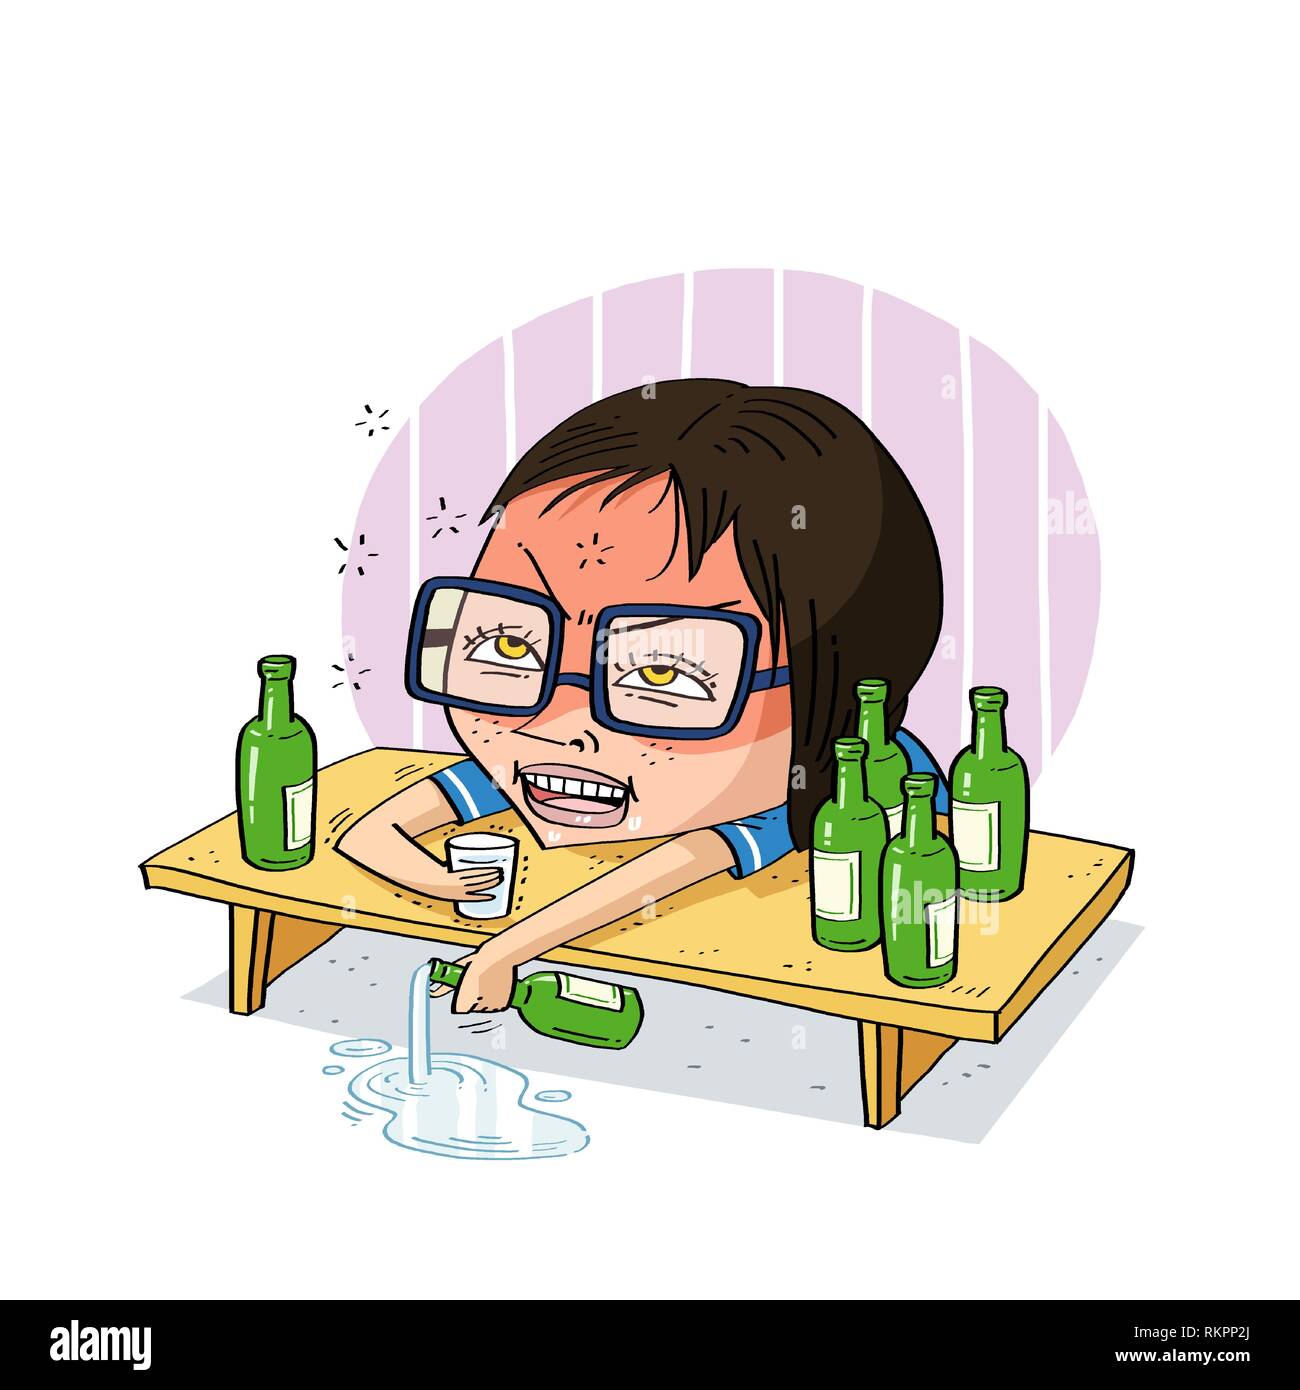 Illness and disease - related health problems, concept cartoon vector illustration. 003 Stock Vector